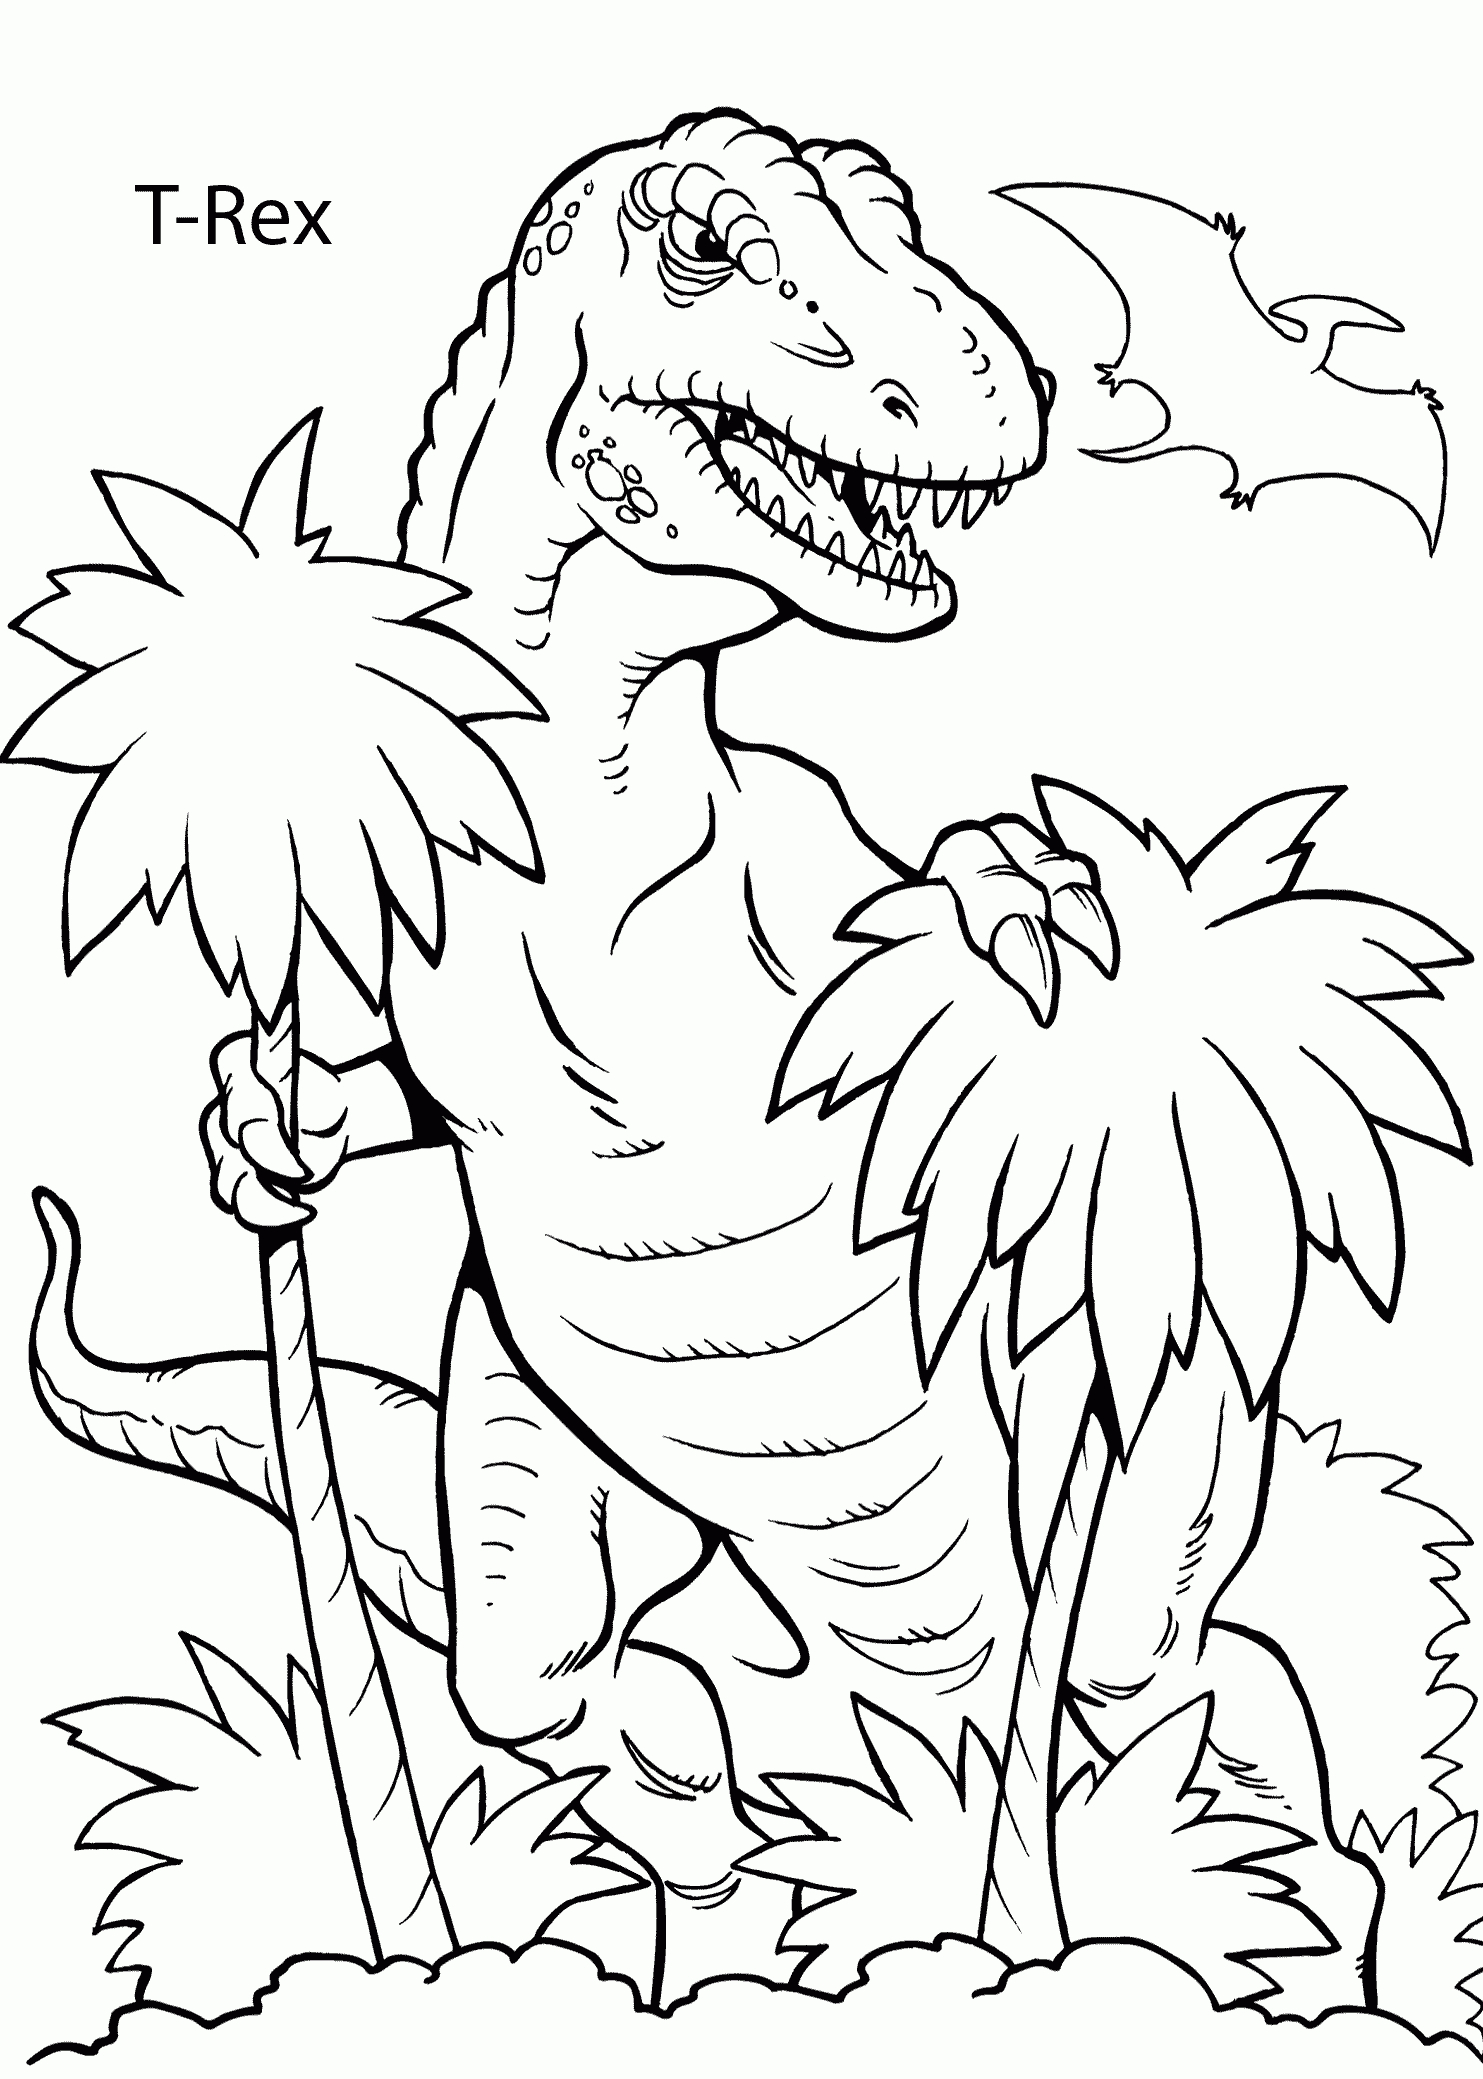 T-Rex Dinosaur Coloring Pages For Kids, Printable Free | Dinosaures - Free Printable Dinosaur Coloring Pages